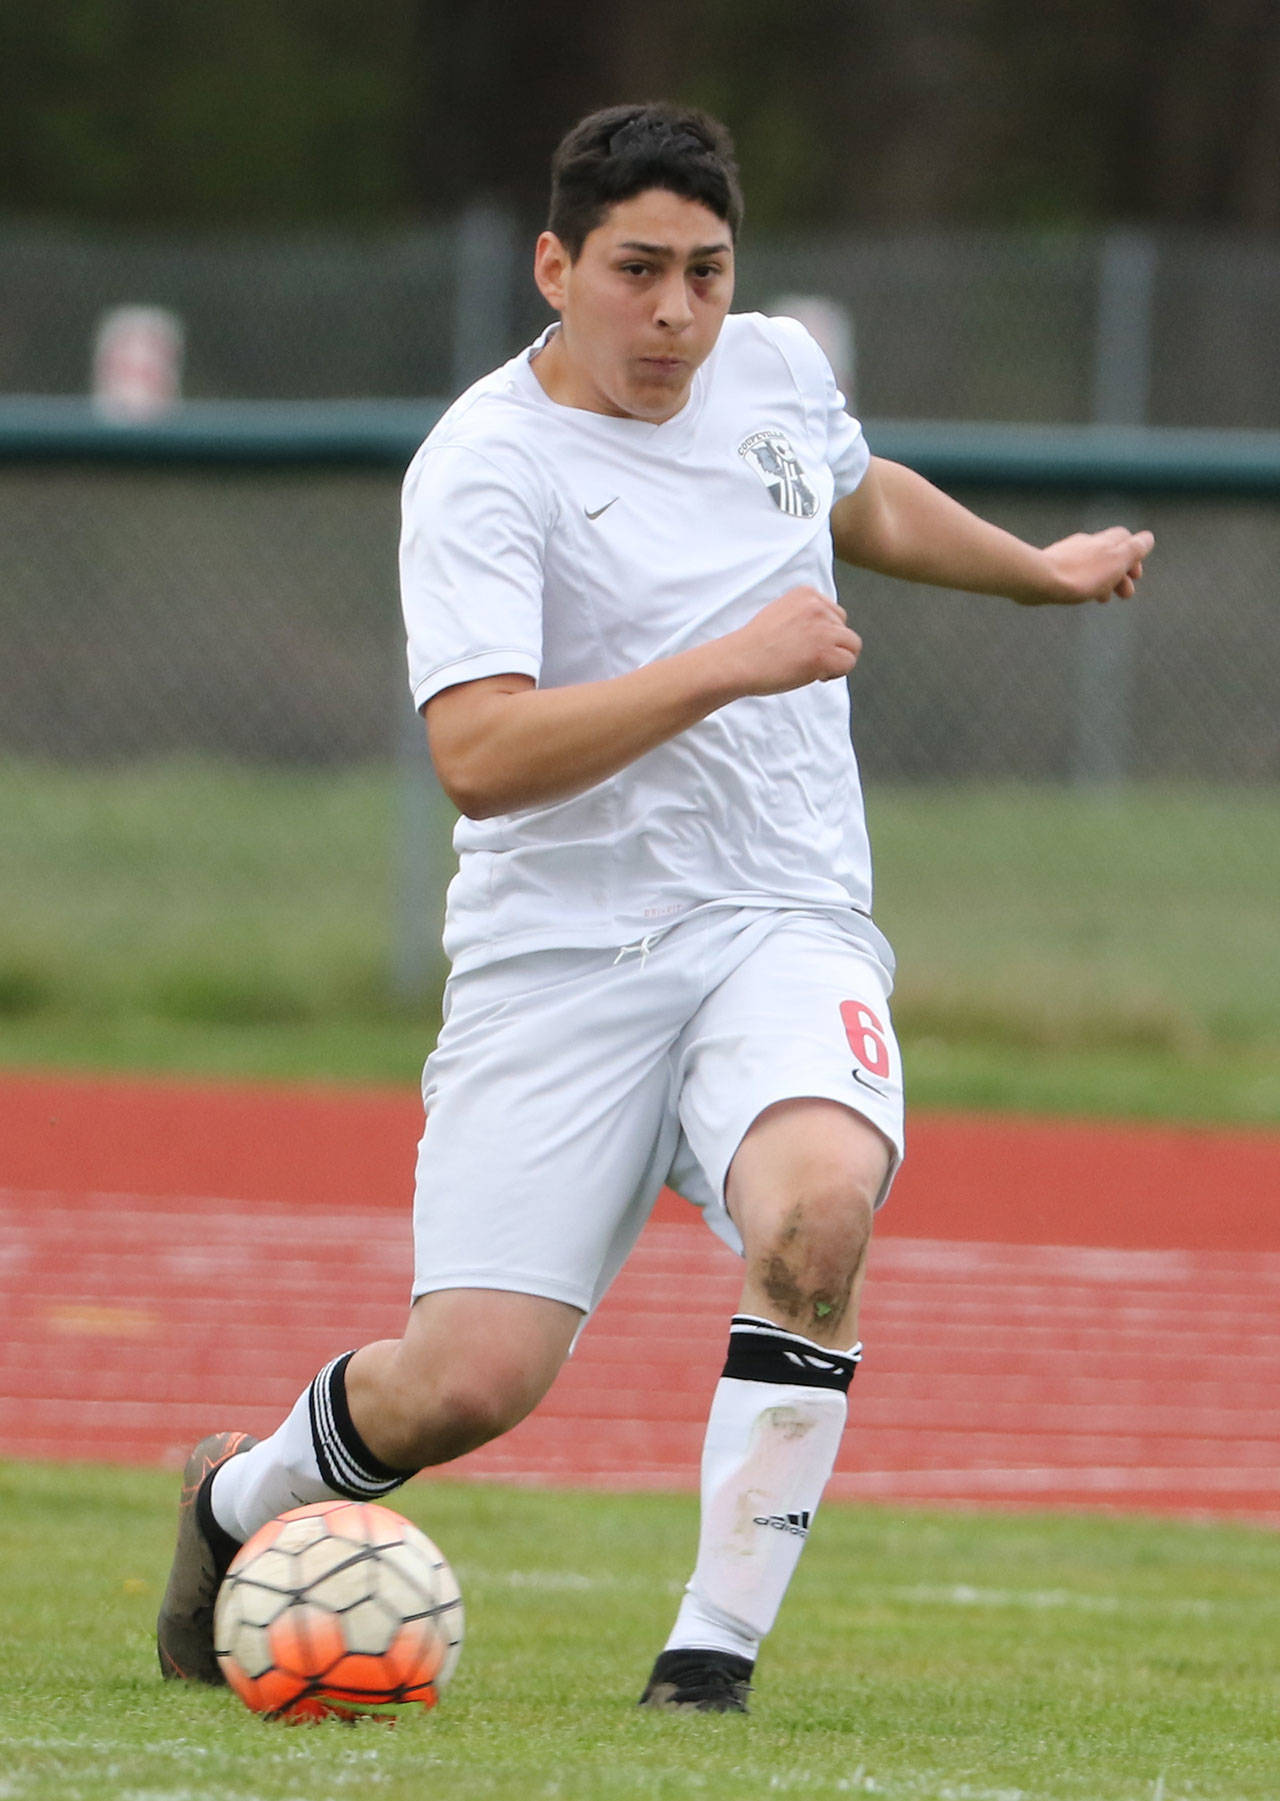 Axel Partida advances the ball for the Wolves in the Vashon Island match in Coupeville Monday. (Photo by John Fisken)